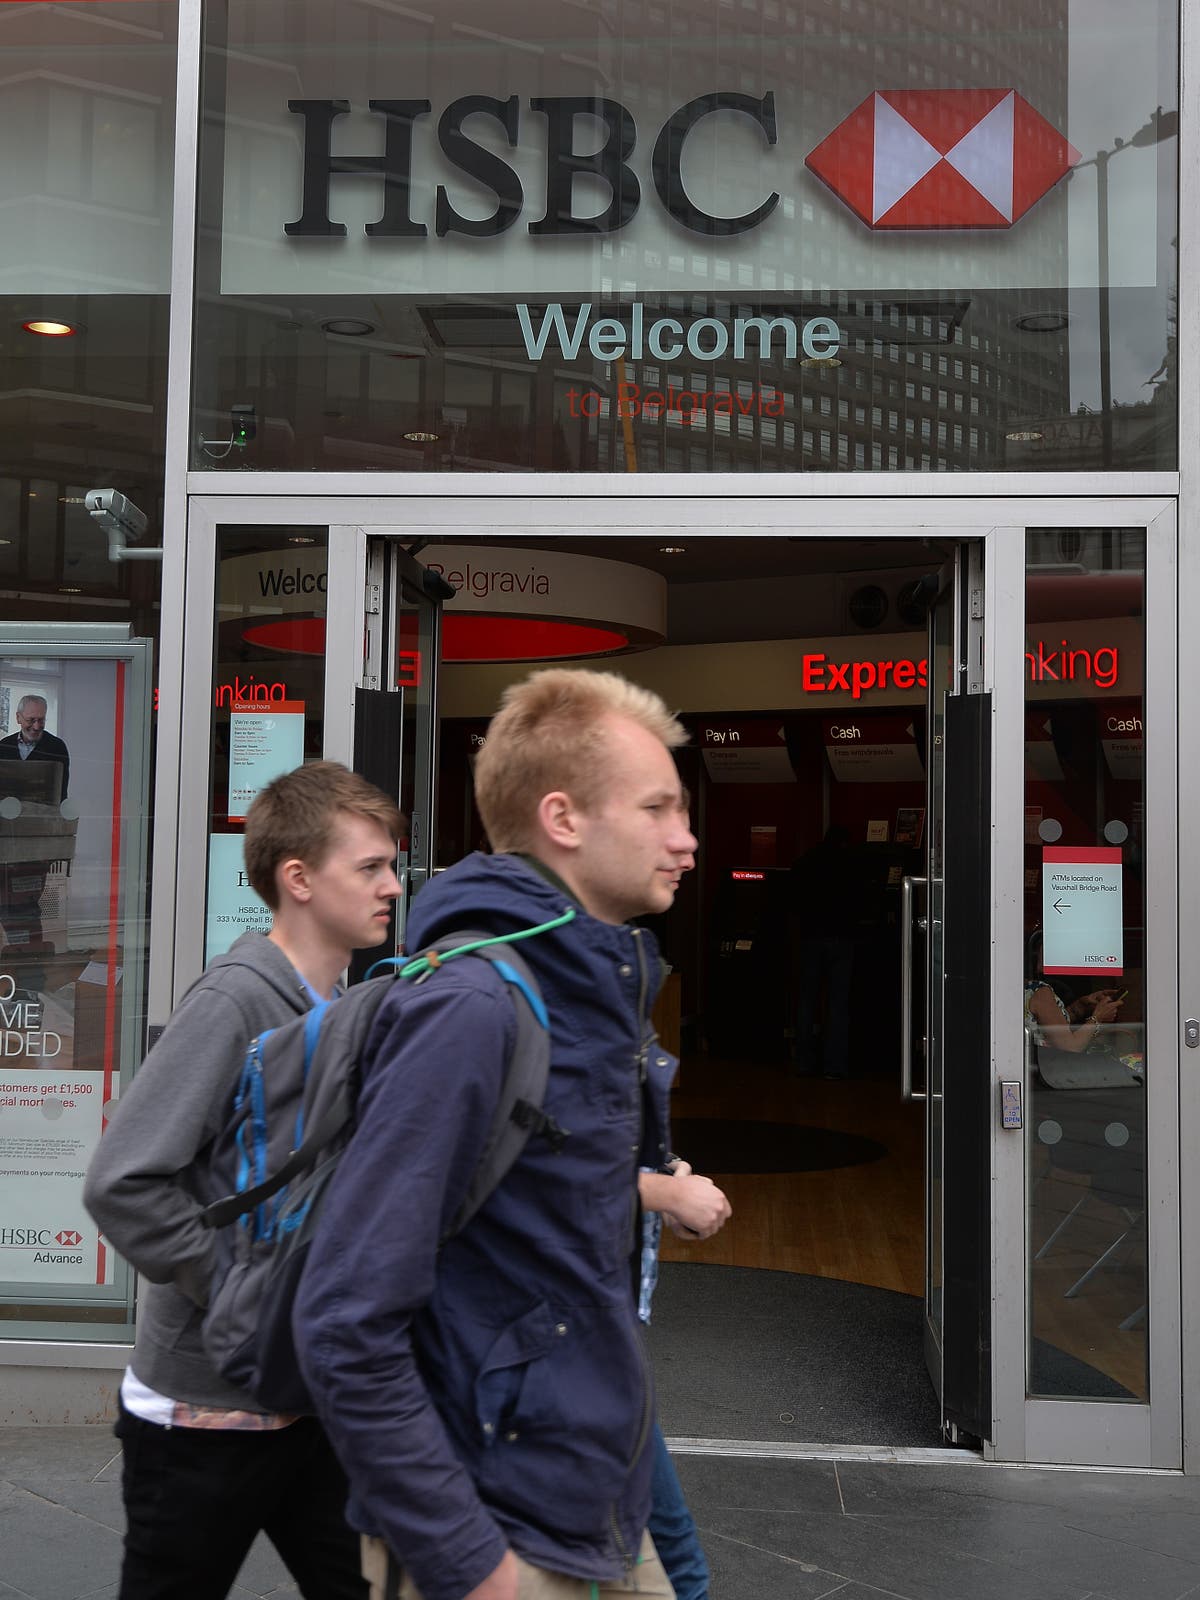 Current account customers being offered £110 cash to switch to HSBC